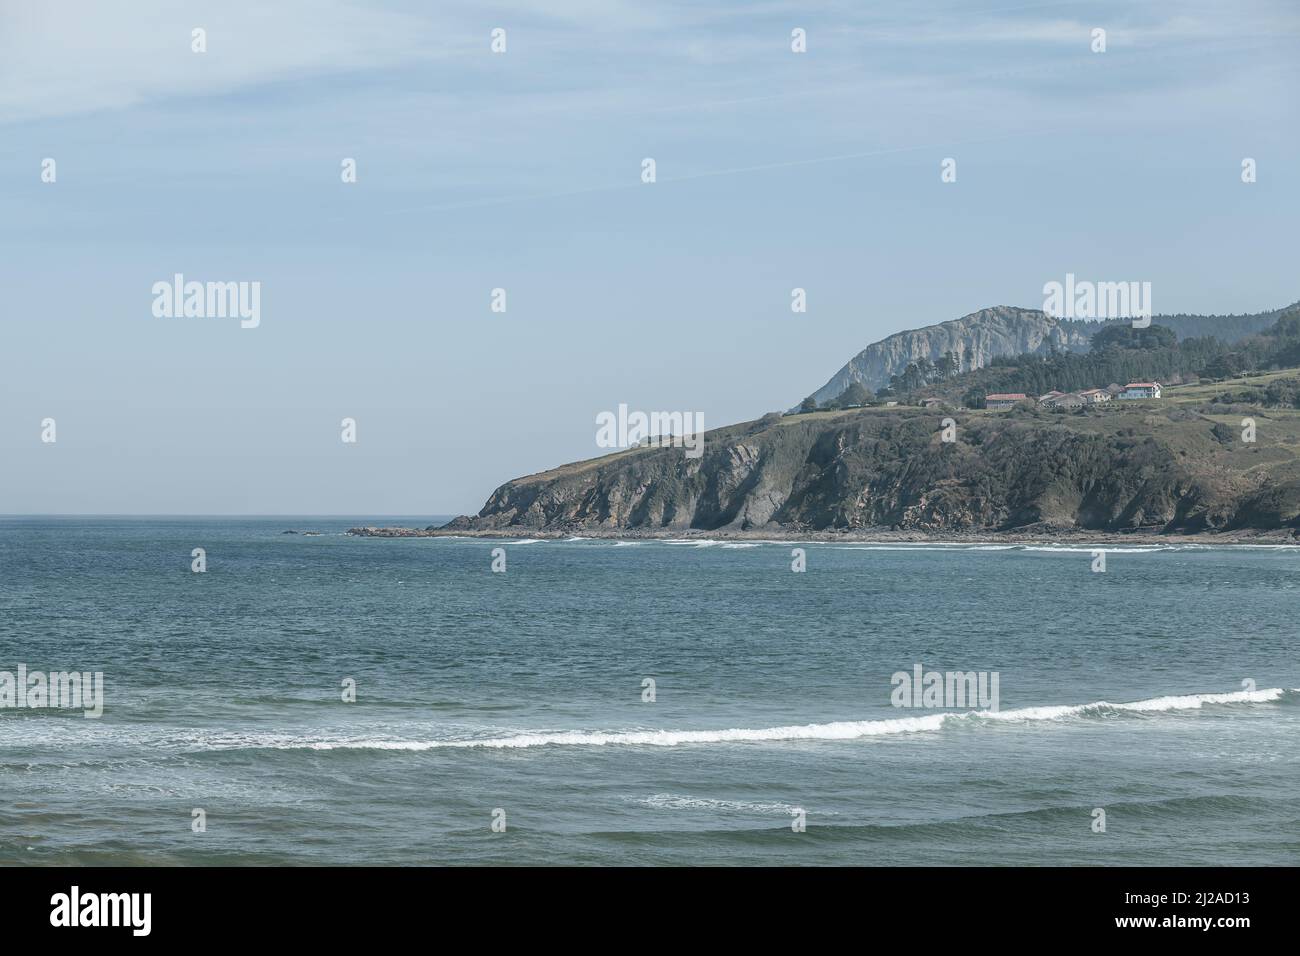 Views of a beautiful landscape in horizontal format of the Urdaibai biosphere reserve, a perfect combination of mountain and beach on a sunny day. Stock Photo